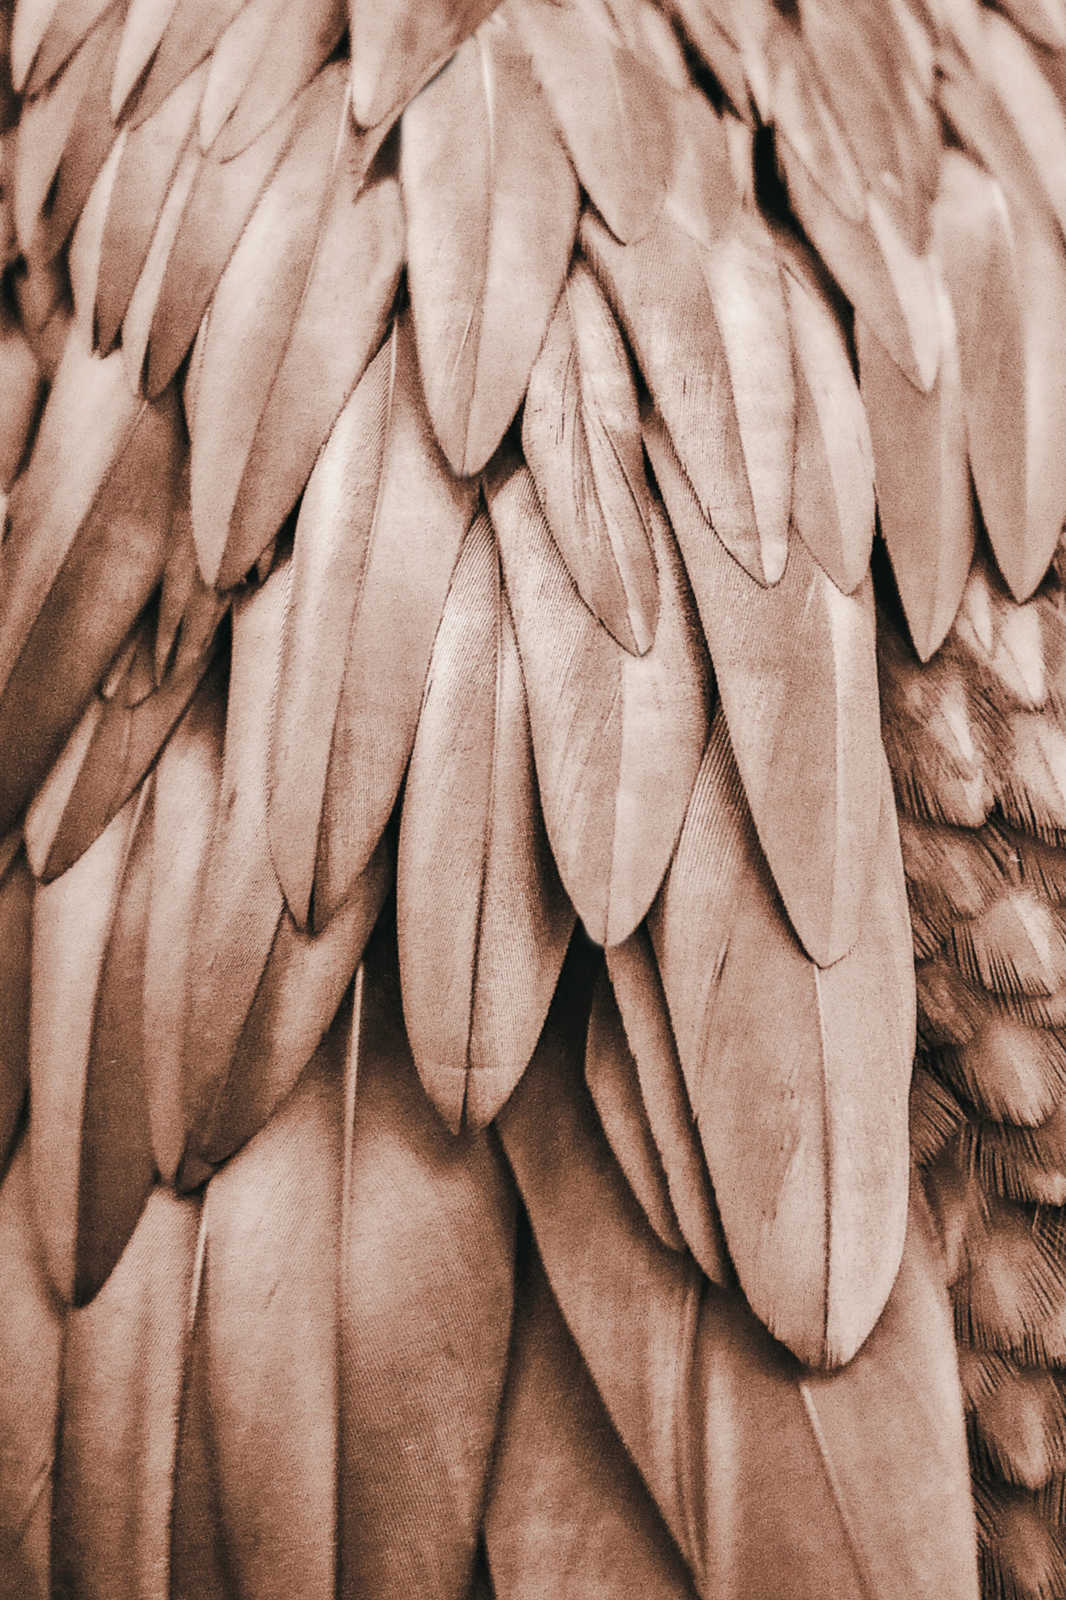             Canvas painting Feather Wings in Sepia Brown - 1.20 m x 0.80 m
        